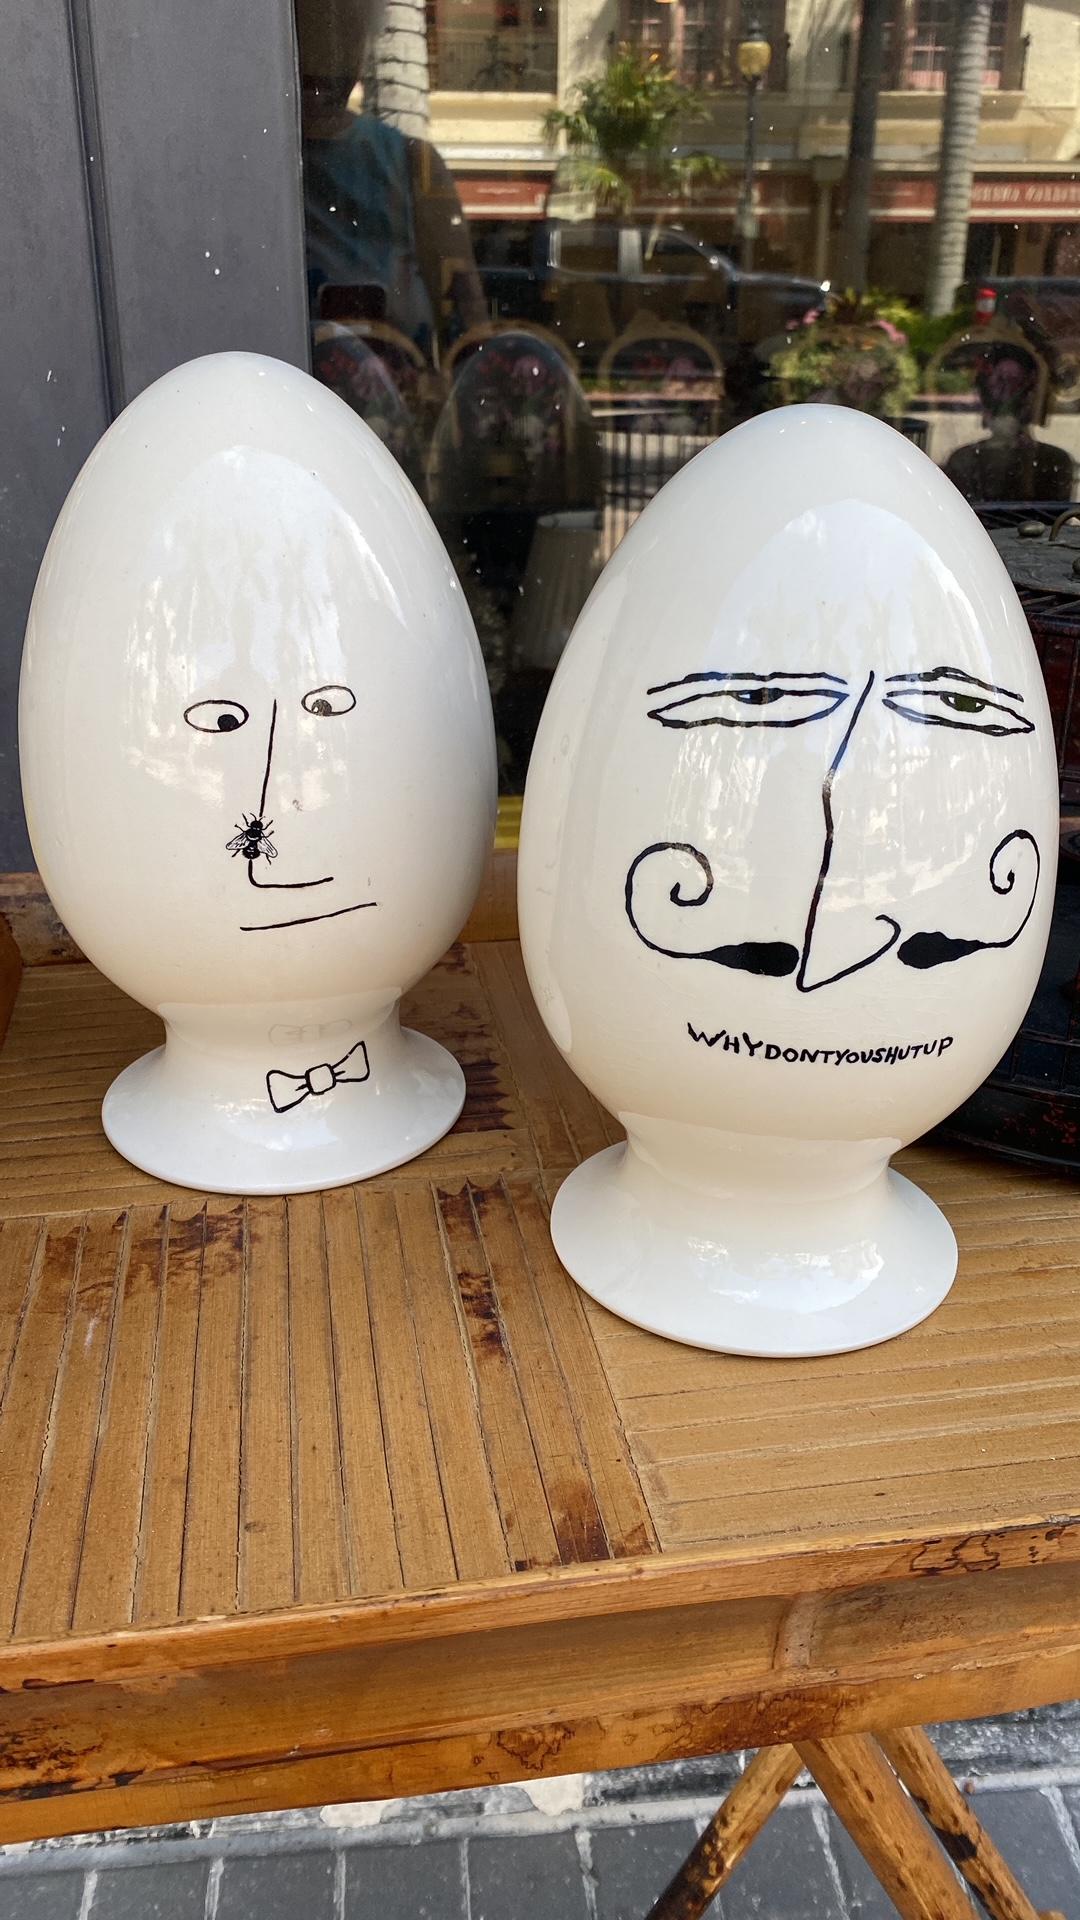 This Pair of RARE Mid-Century Modern ceramic EGGHEAD containers where designed and made for PLAYBOY by La Gardo Tackett (American 1911 - 1984) for Schmid Int'l One with a mustachioed face declaring